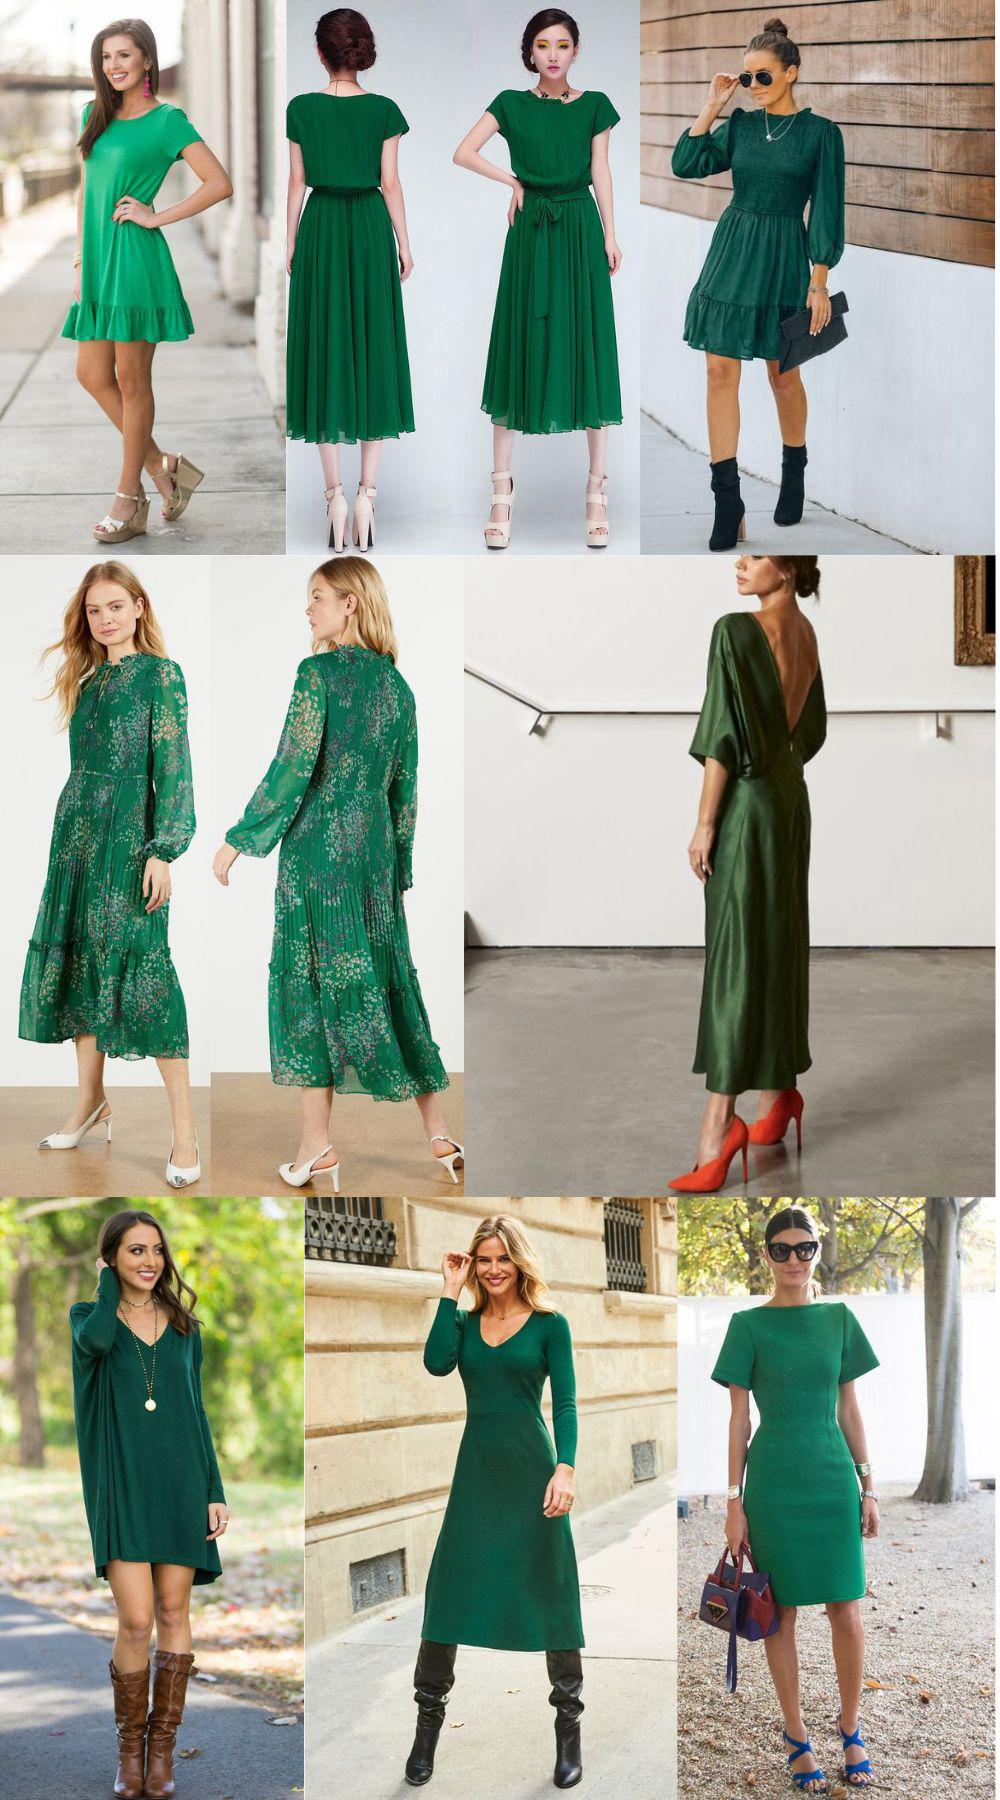 What Color Shoes to Wear with Green Dress